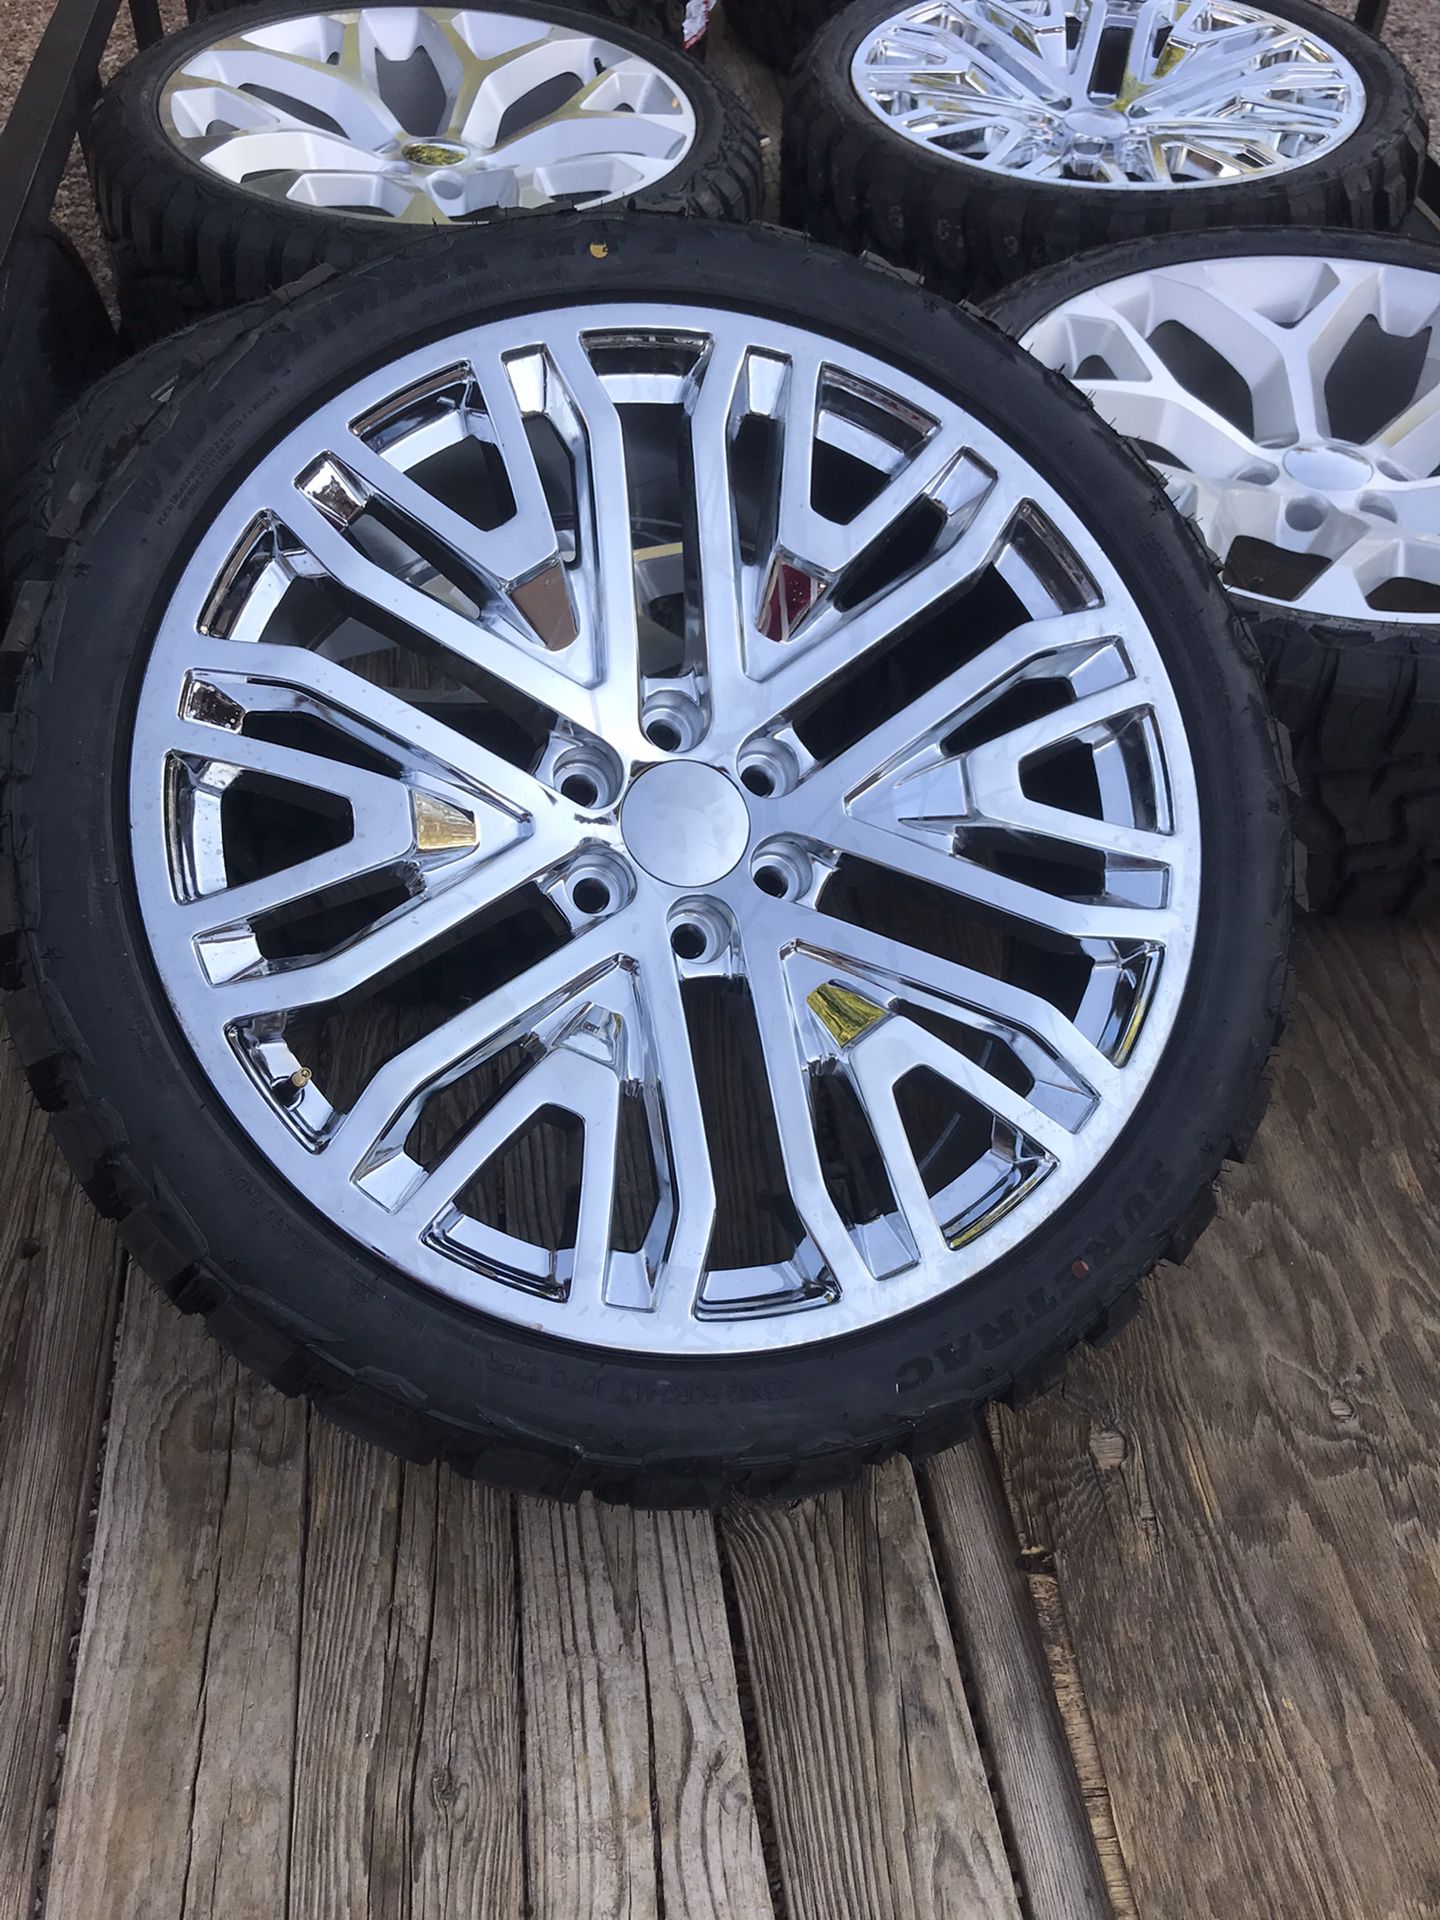 24s GMC 2020 Reps On 33s for Sale in Glendale, AZ - OfferUp